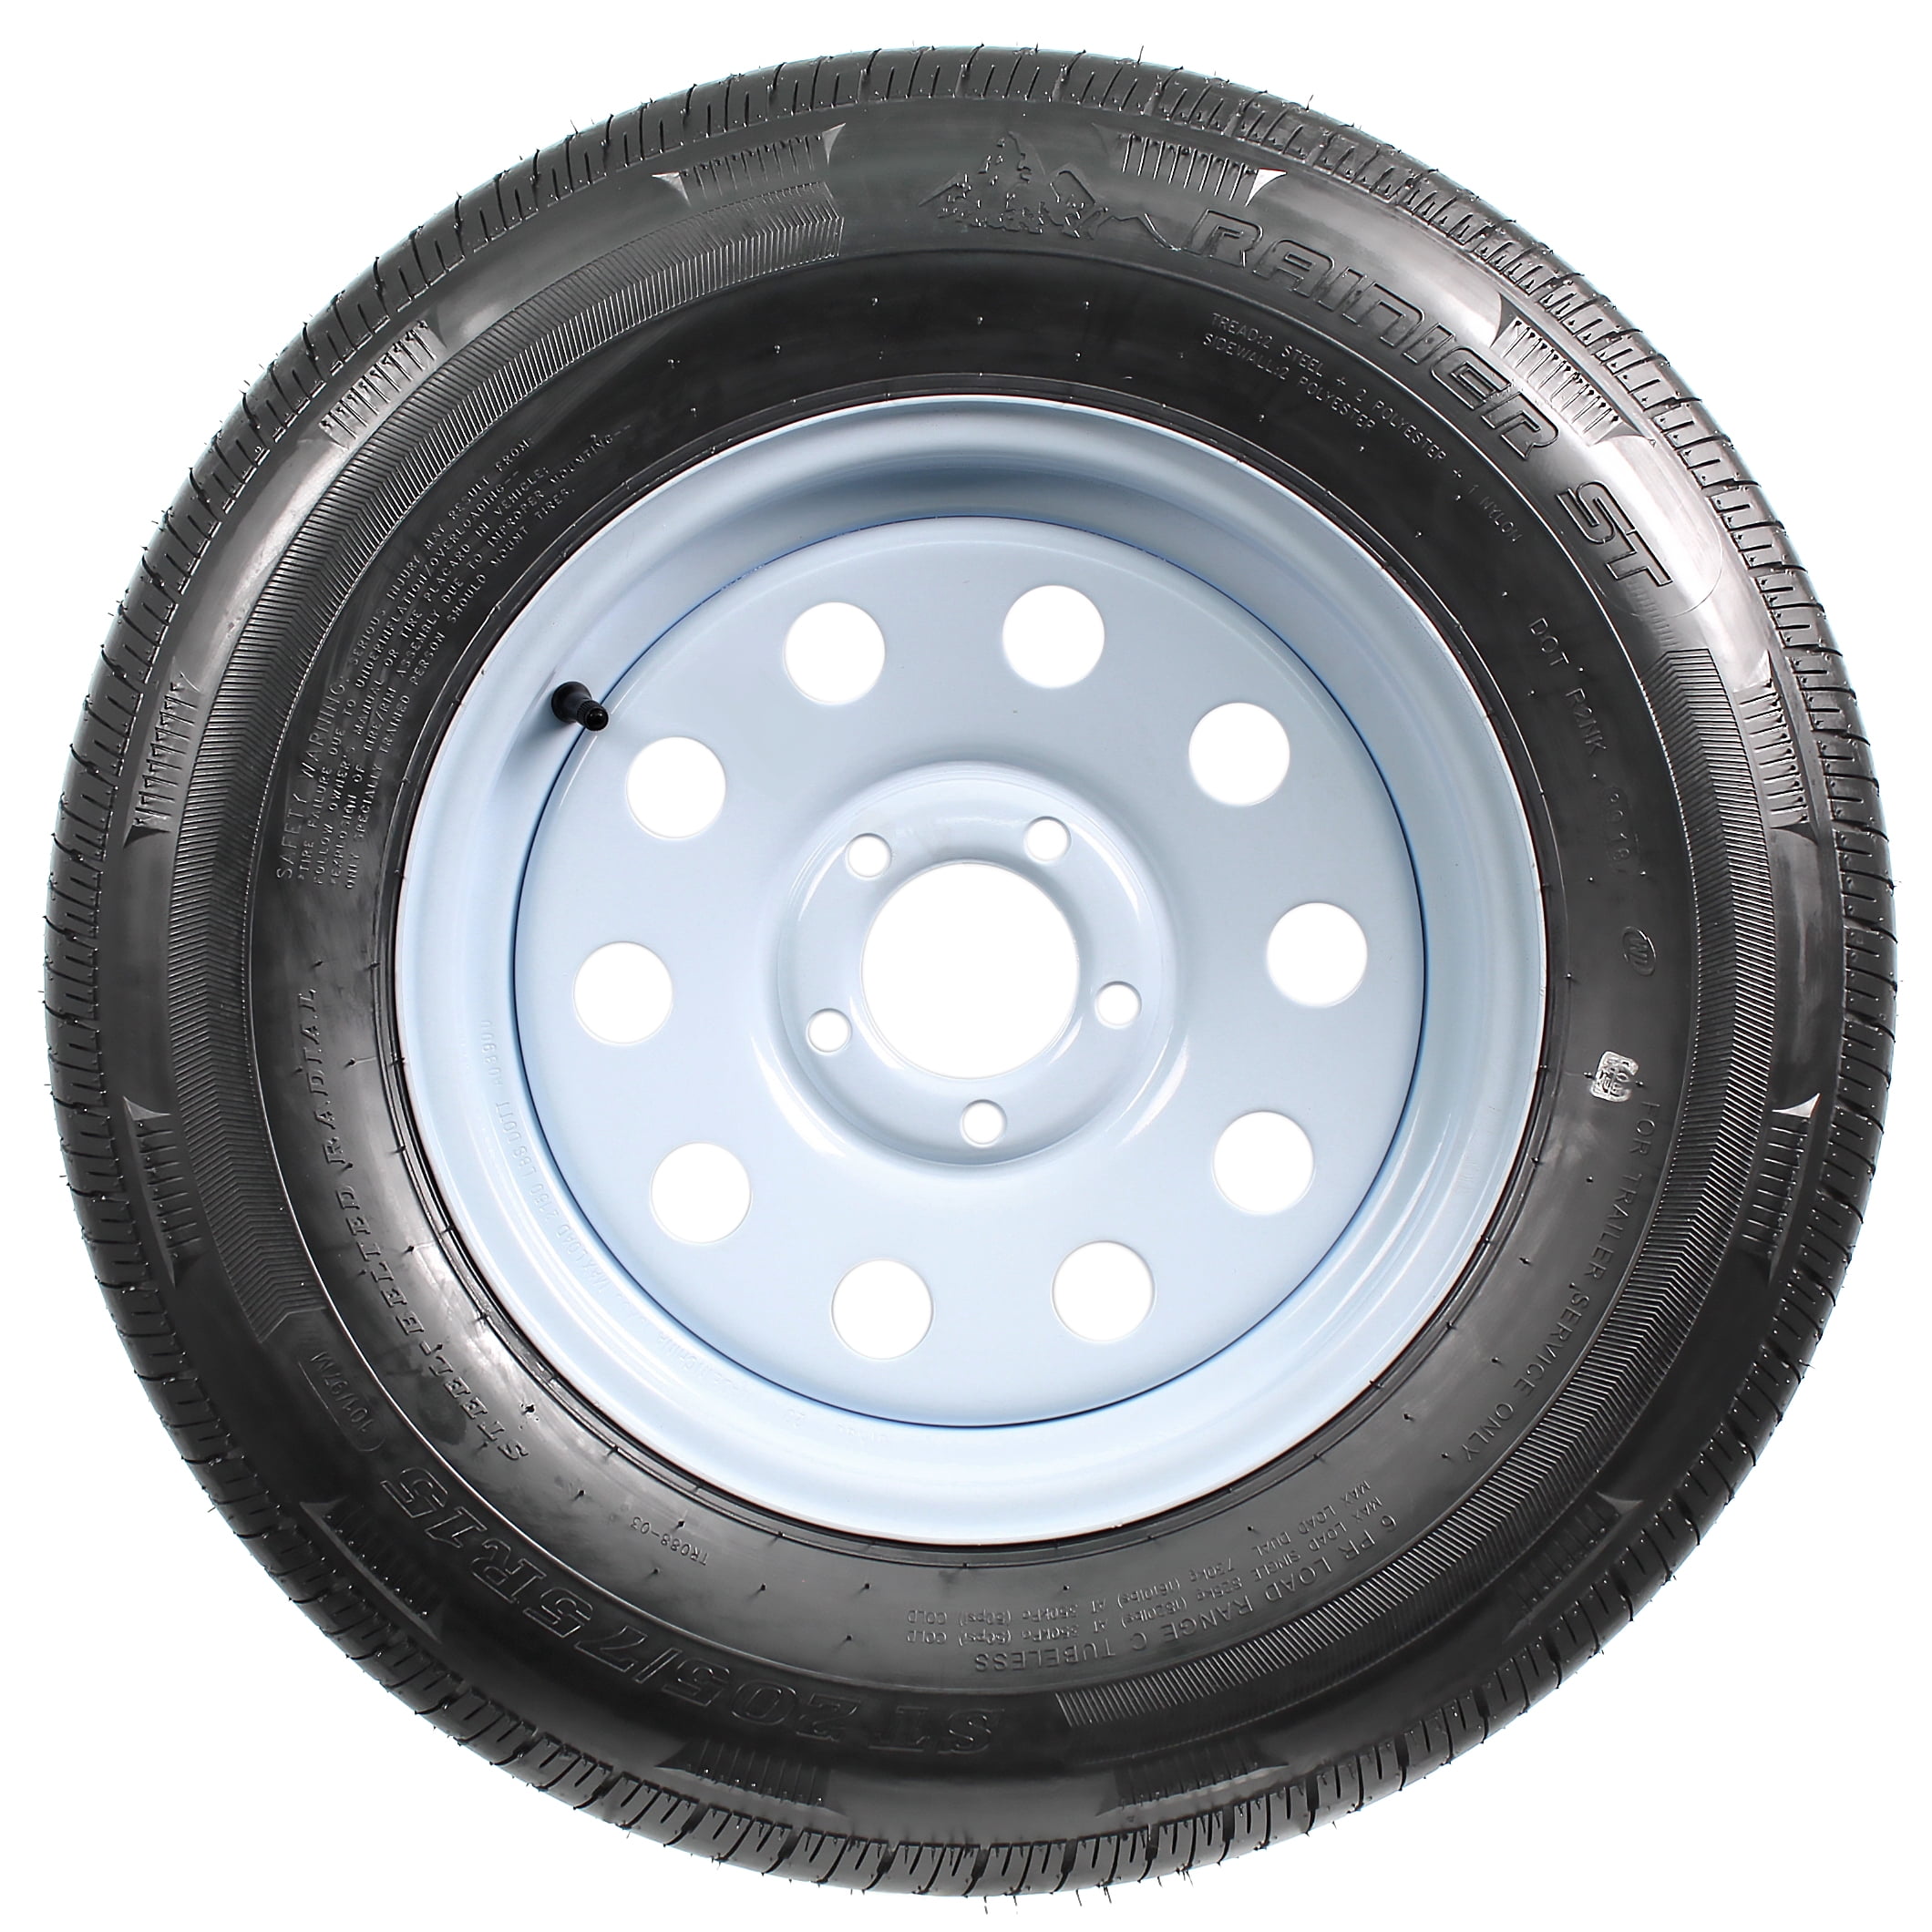 ST215/75R-14 6-PLY With 5 x 4.5" lug Painted Wheel Trailer Tire & Rim Radial